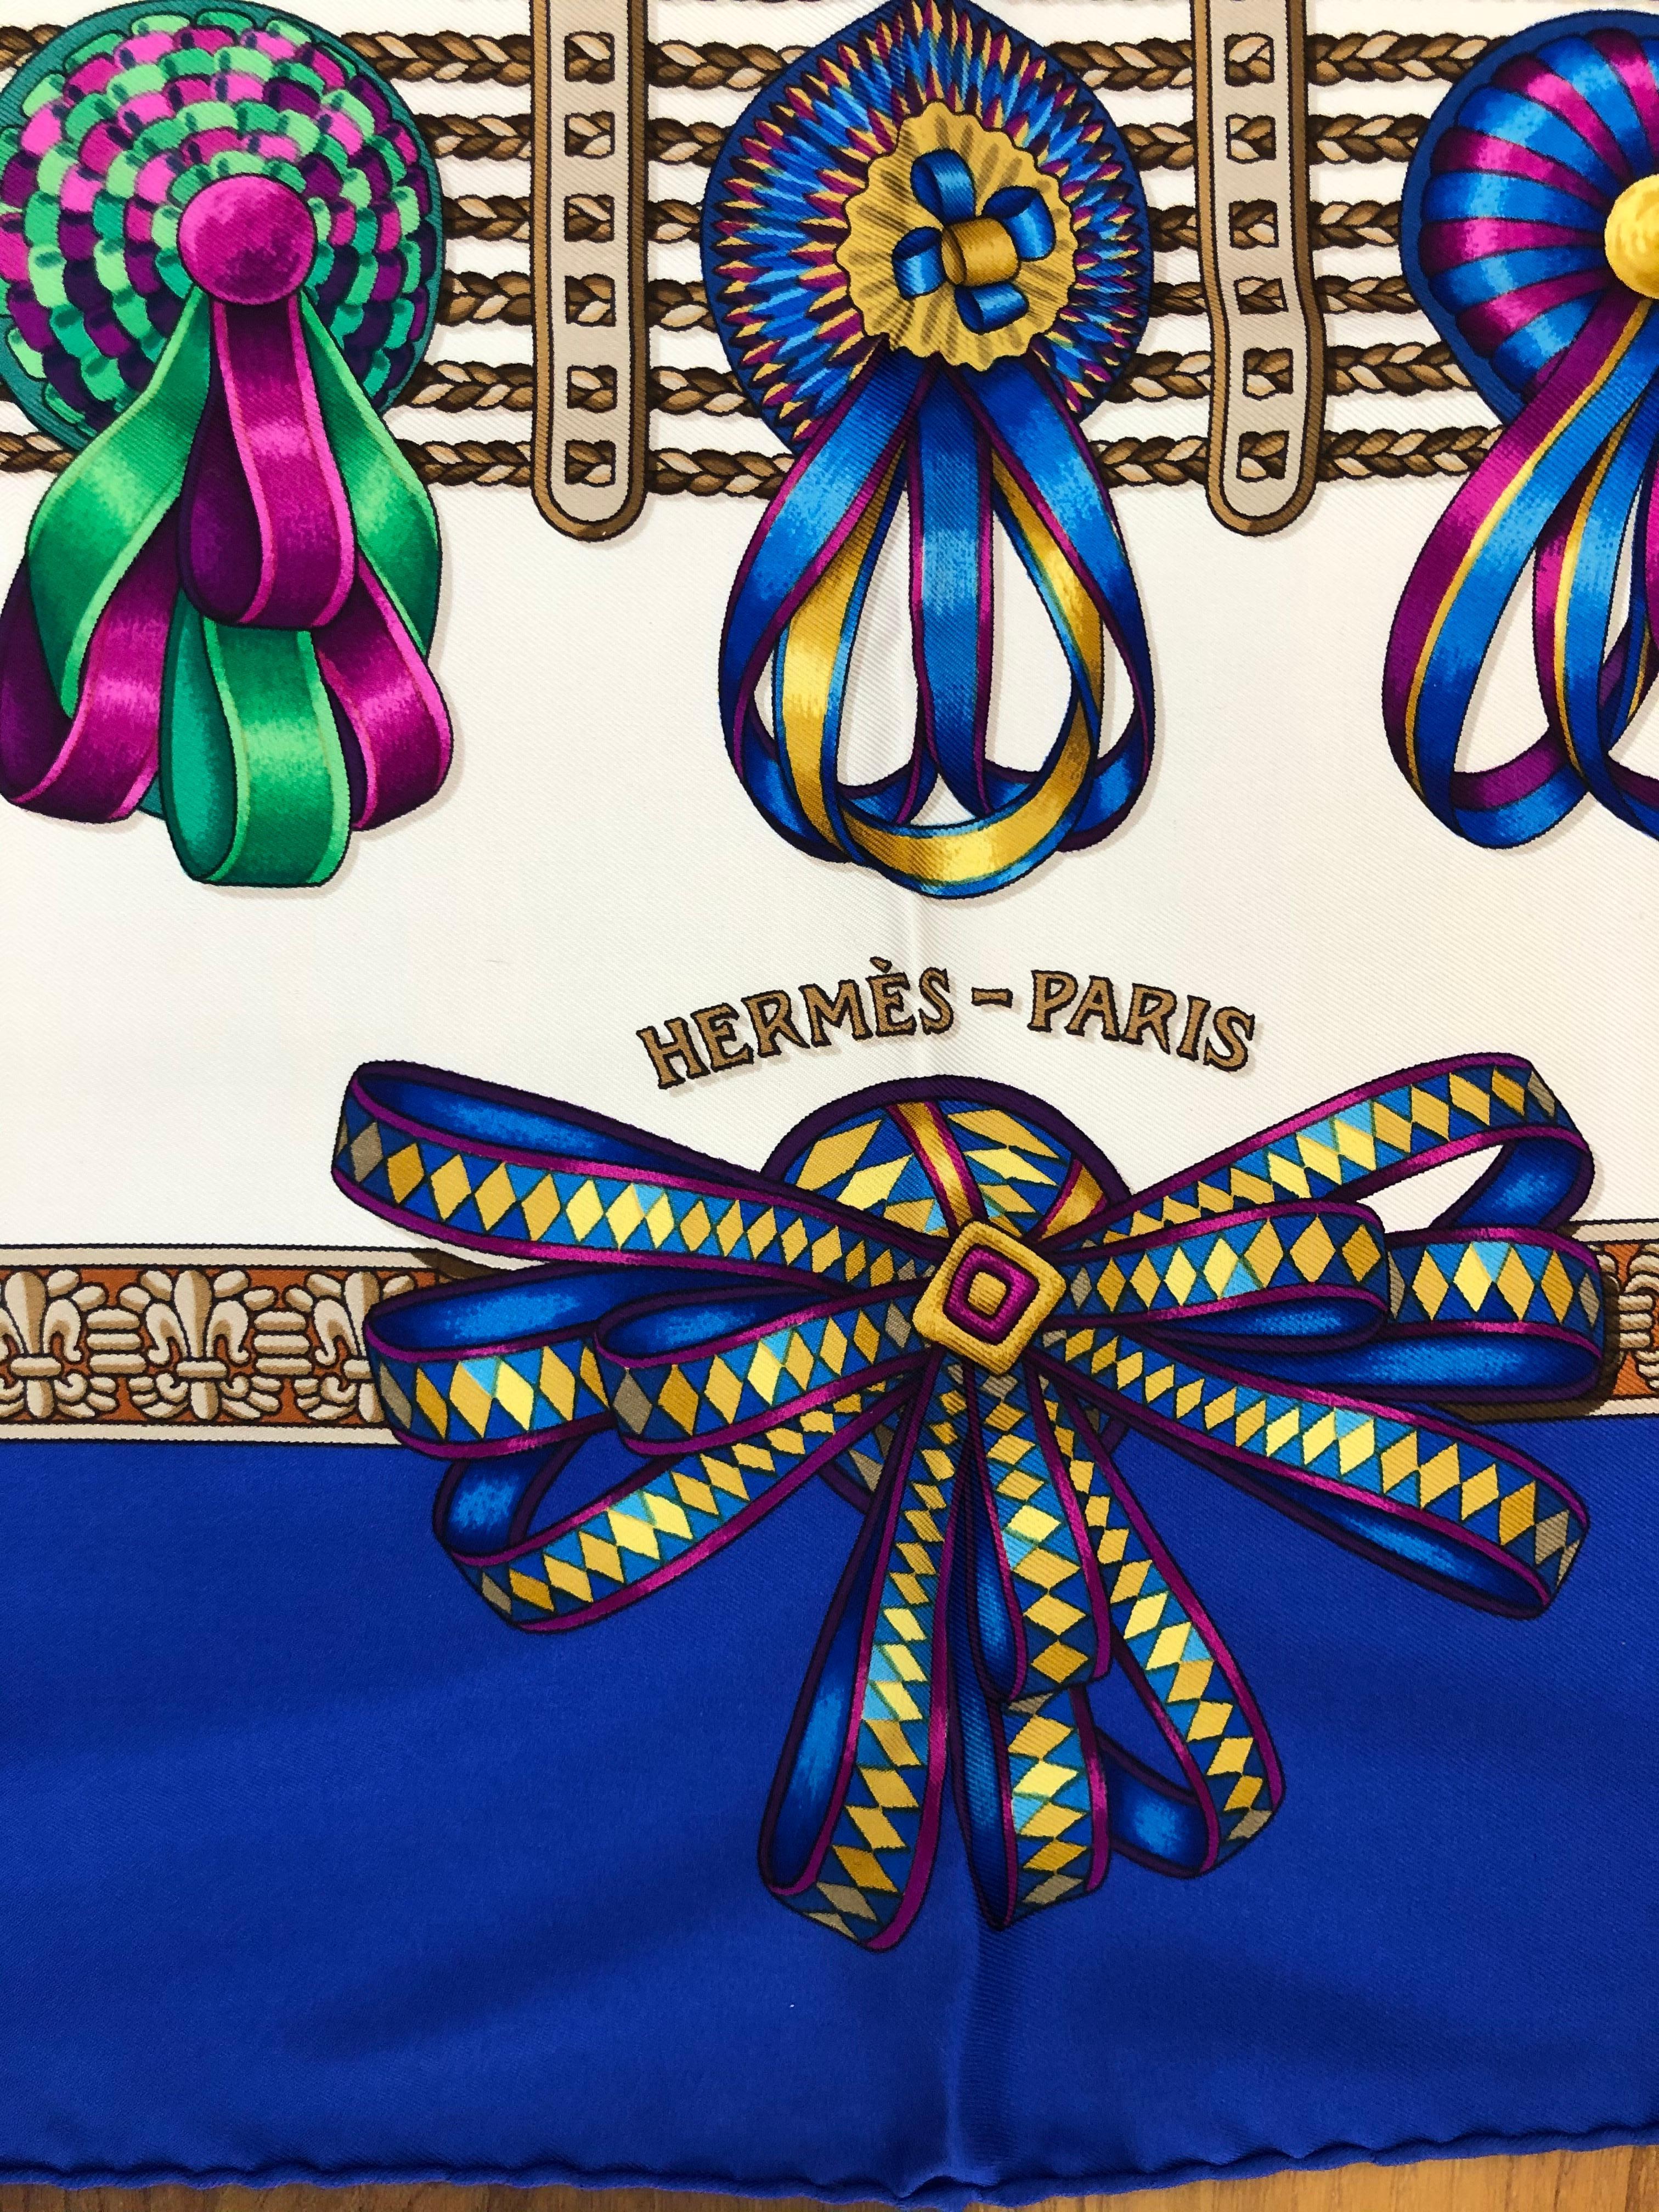 1993 silk scarf designed by Joachim Metz, the scarf is in excellent condition. The graphics feature very colorful equestrian ribbons over a white background and a blue border. The hand rolled hems are nice and plump, and the care tag intact. This